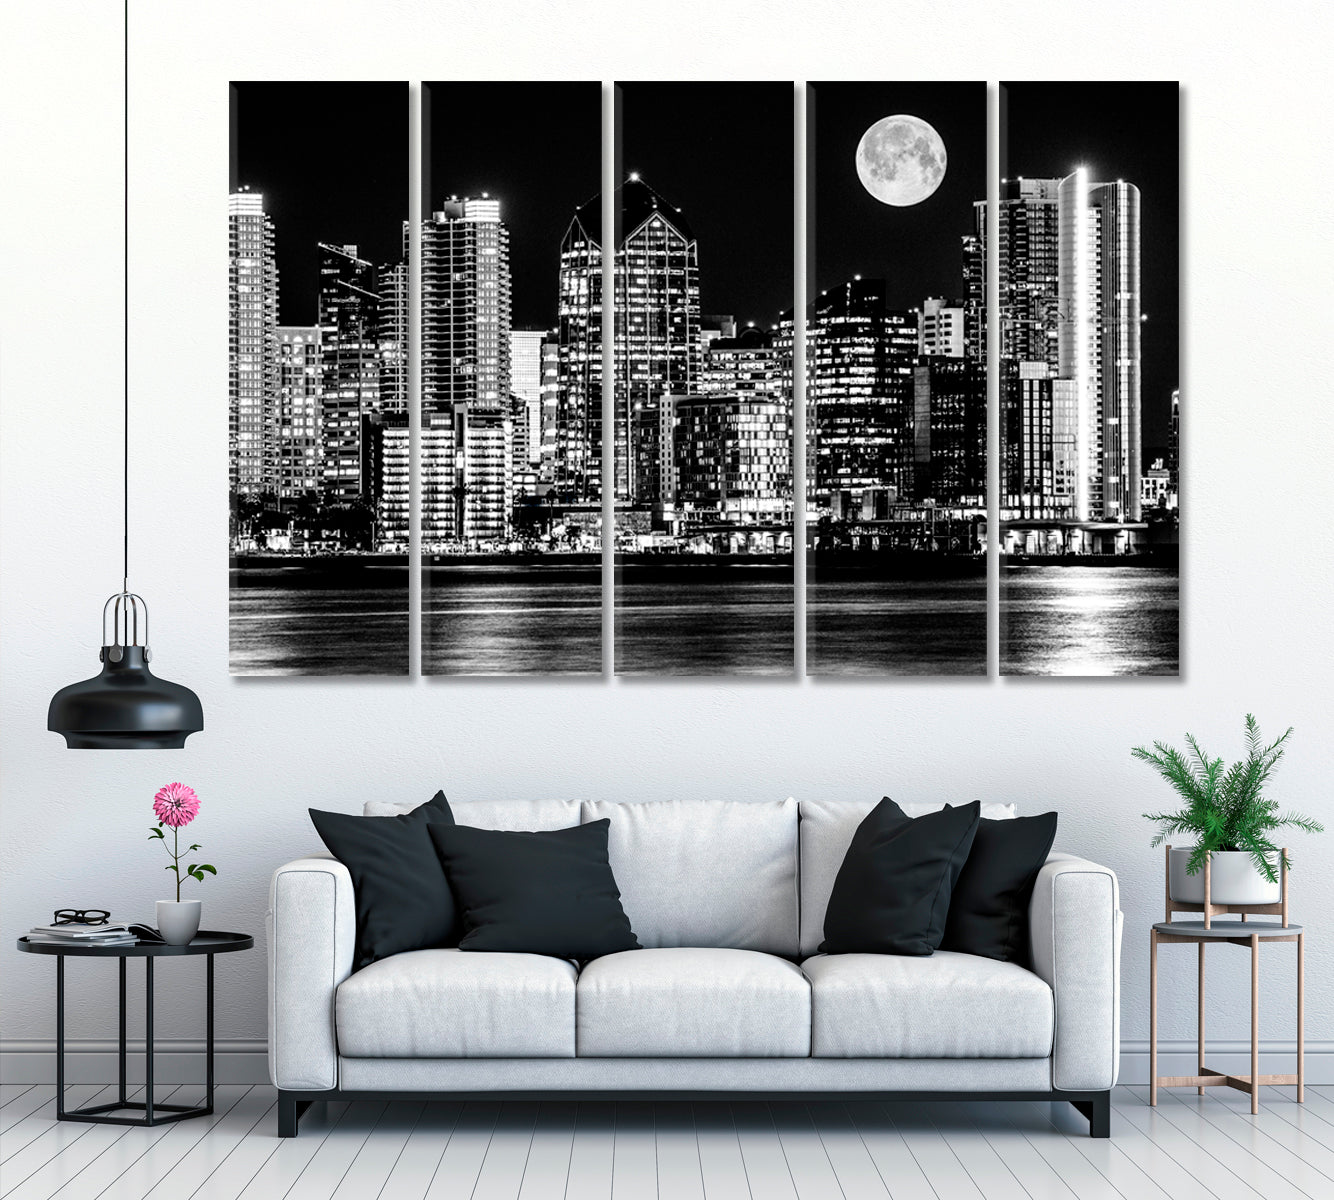 San Diego Skyline in Black and White Canvas Print ArtLexy 5 Panels 36"x24" inches 